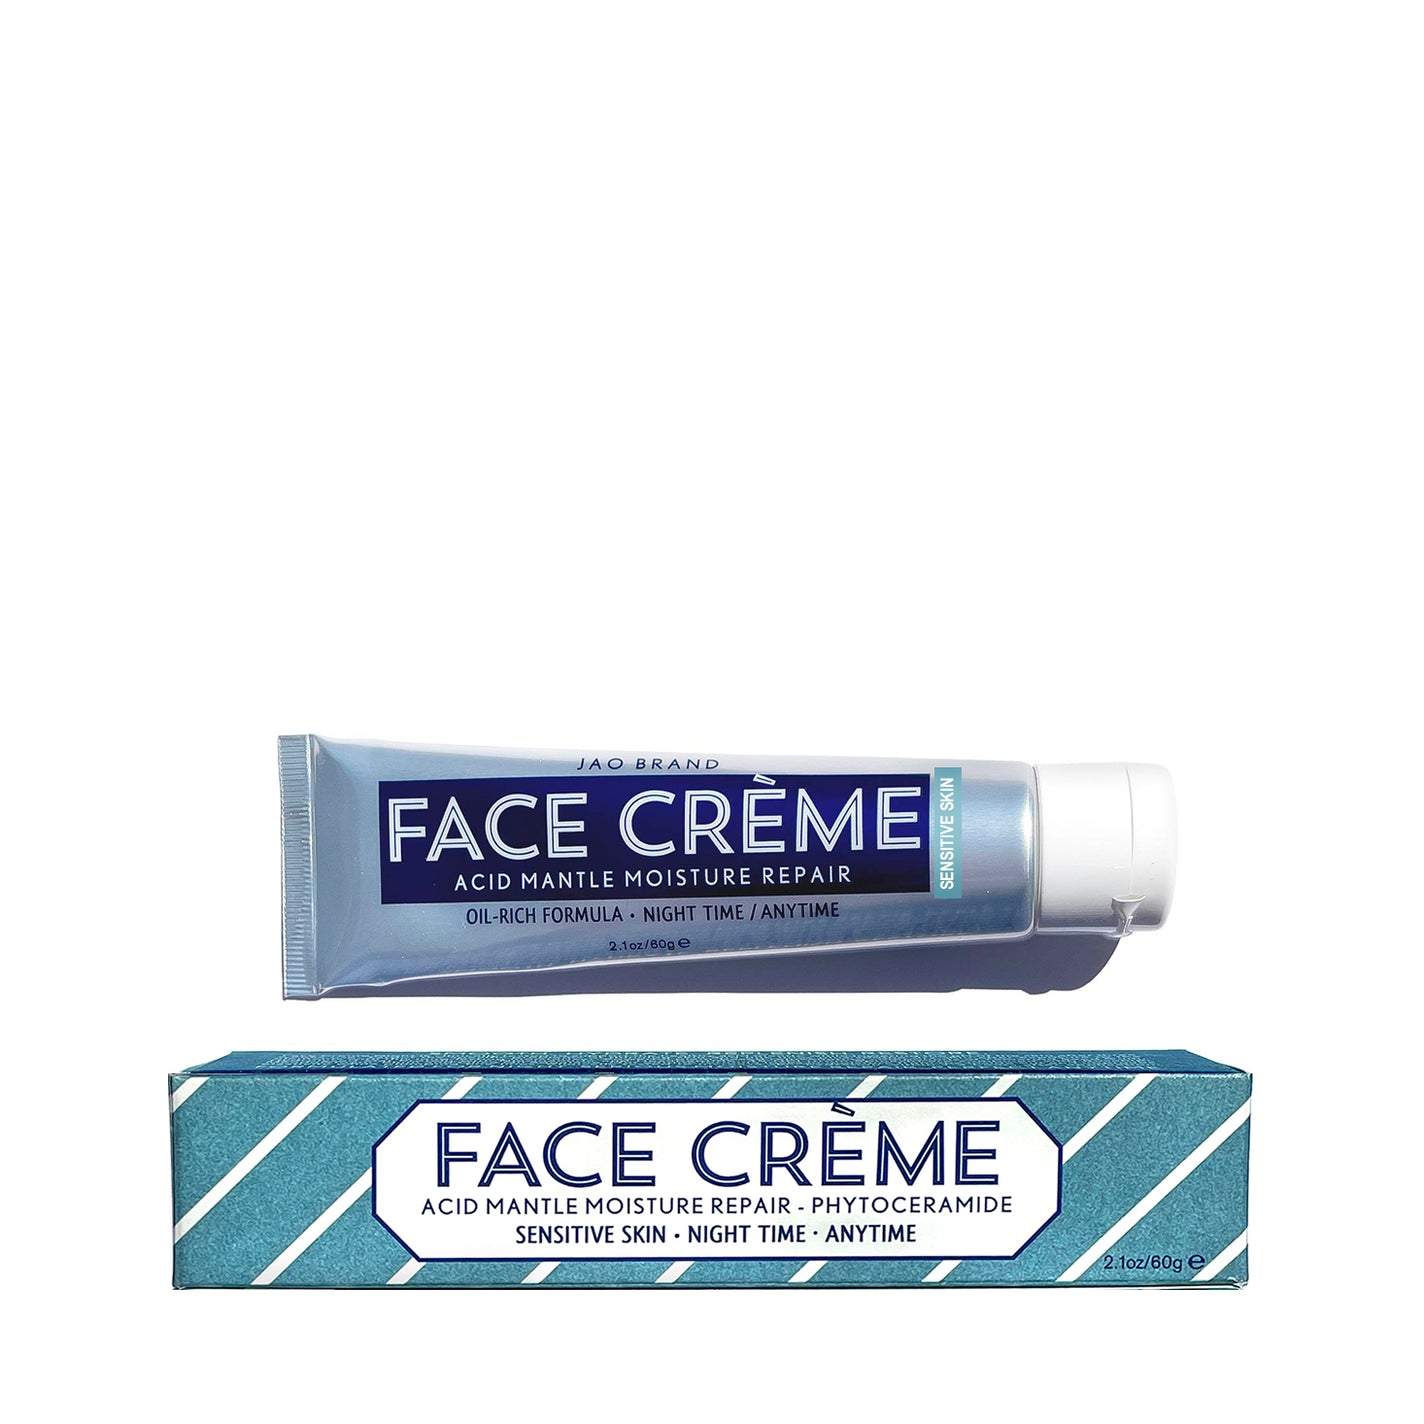 Jao Night Time Anytime Face Creme - Sensitive